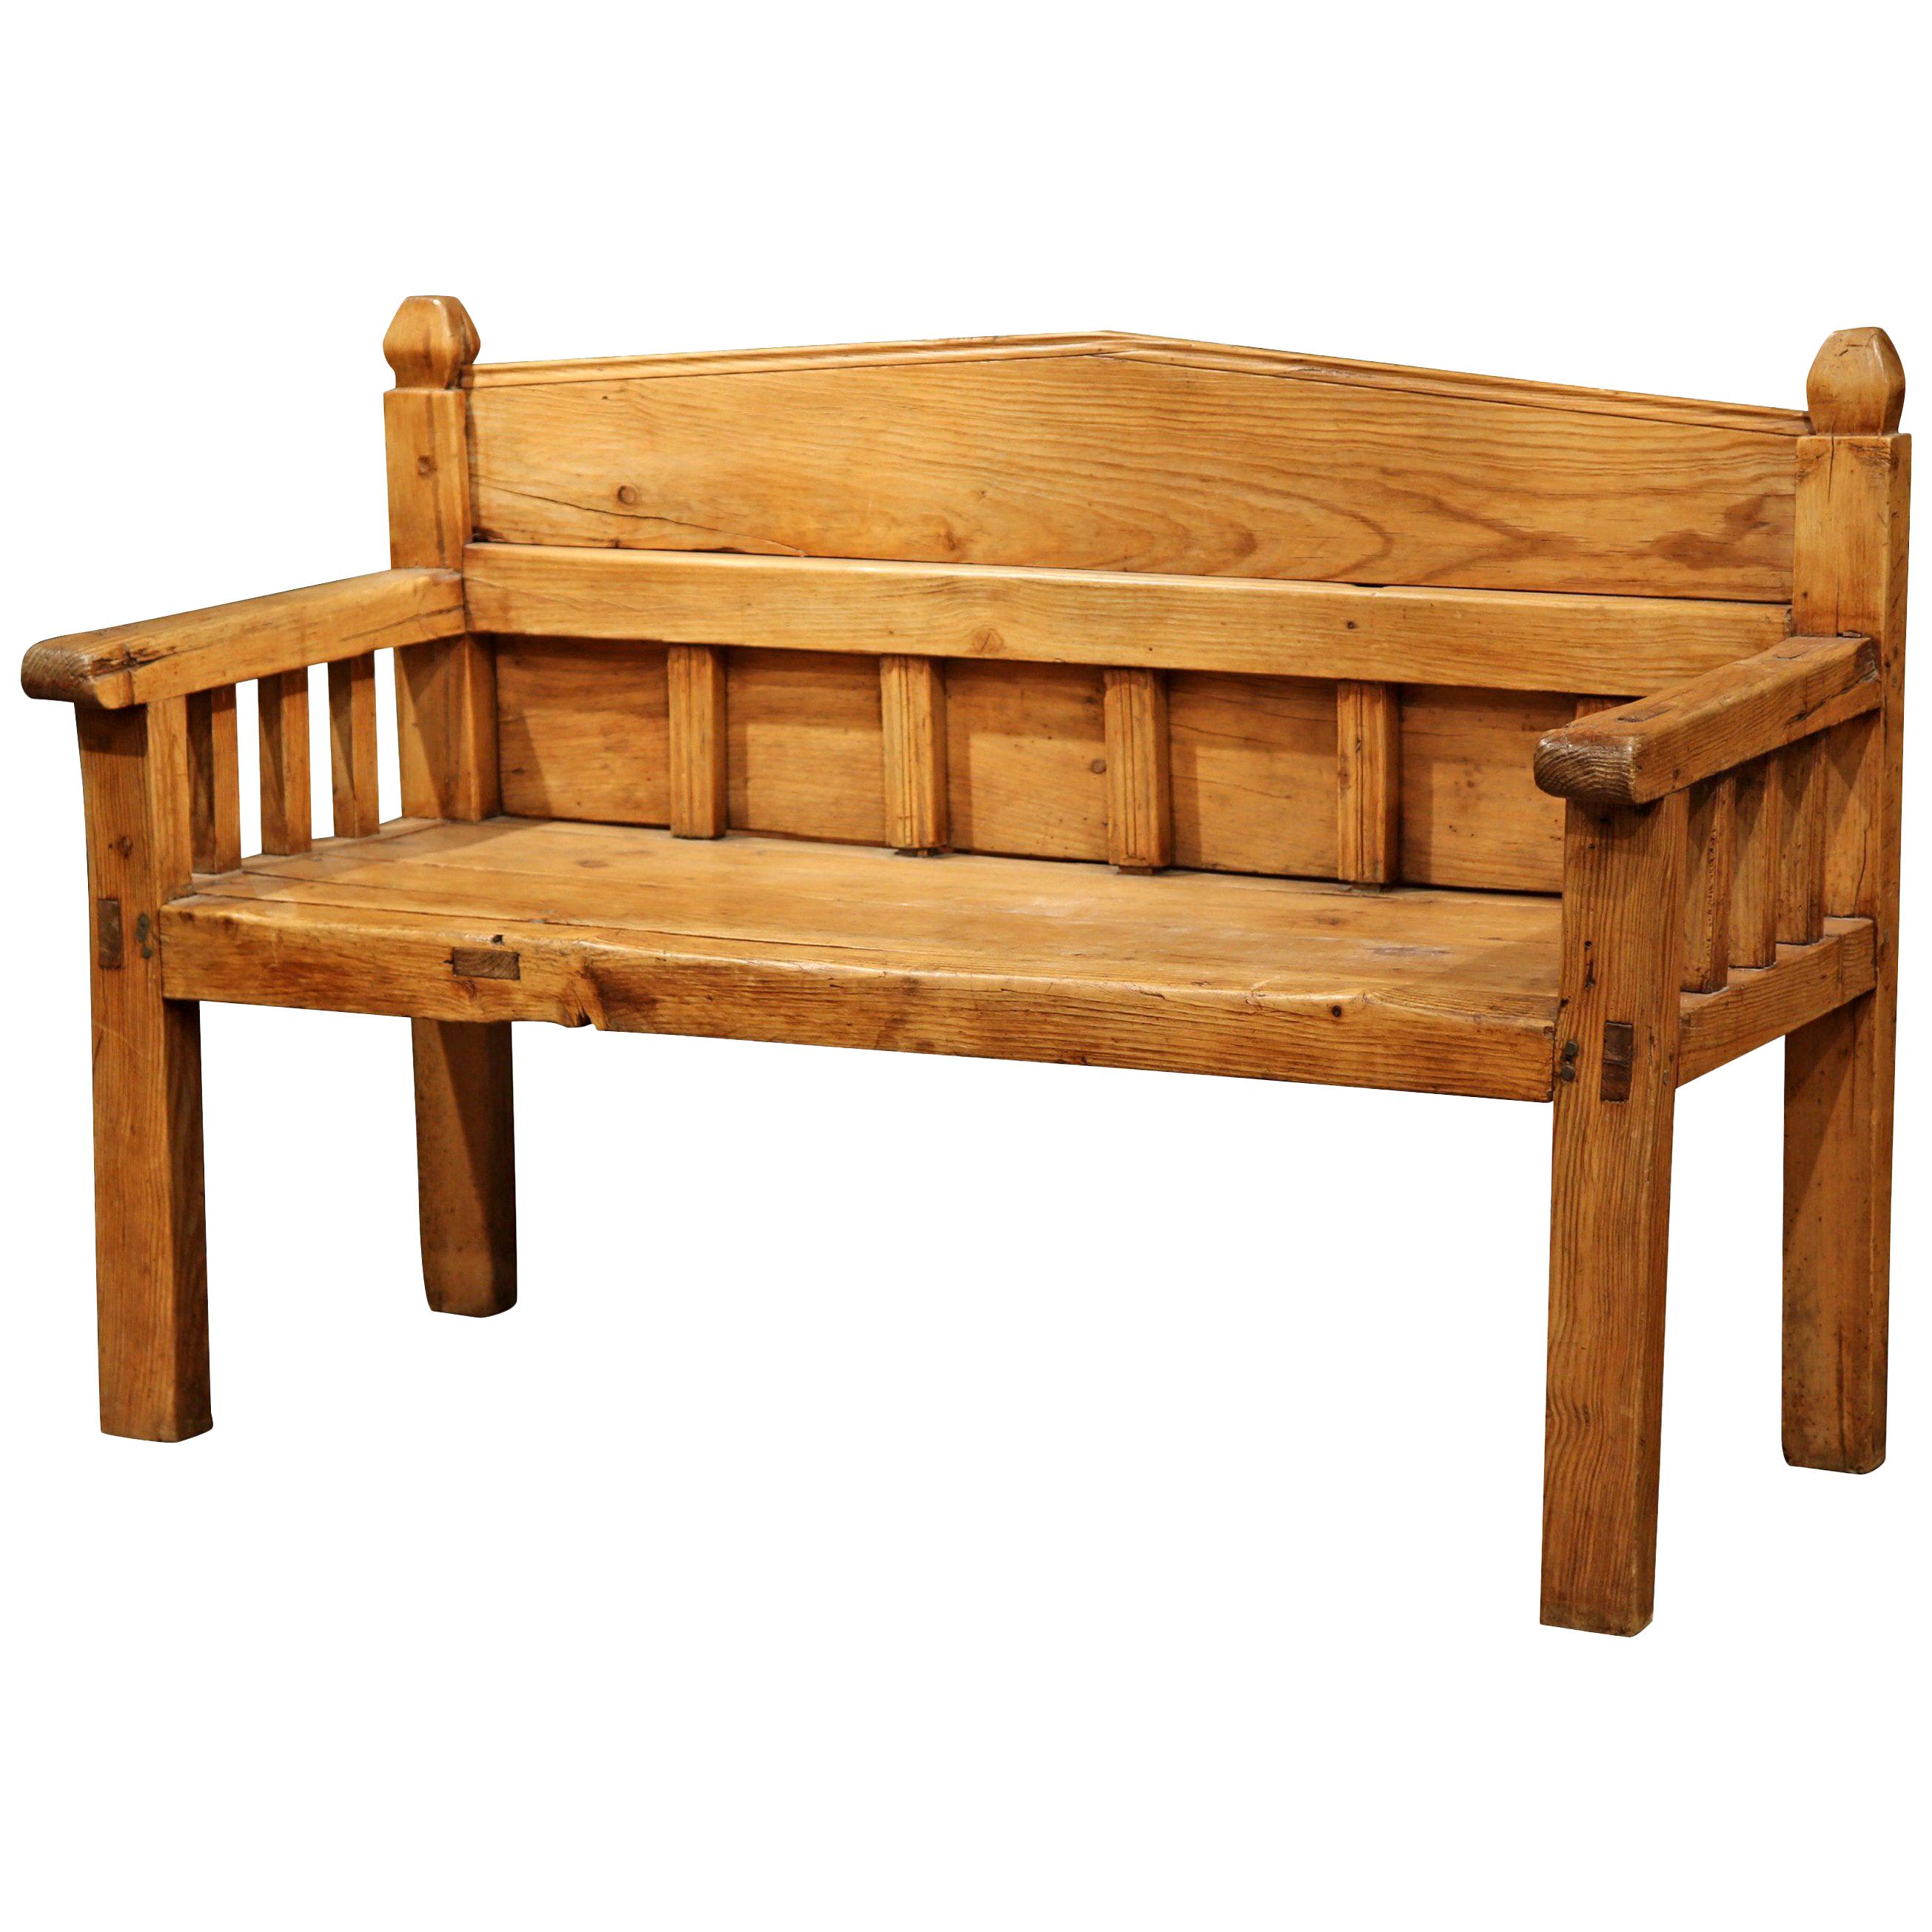 19th Century Country French Carved Pine Bench with Back from the Pyrenees